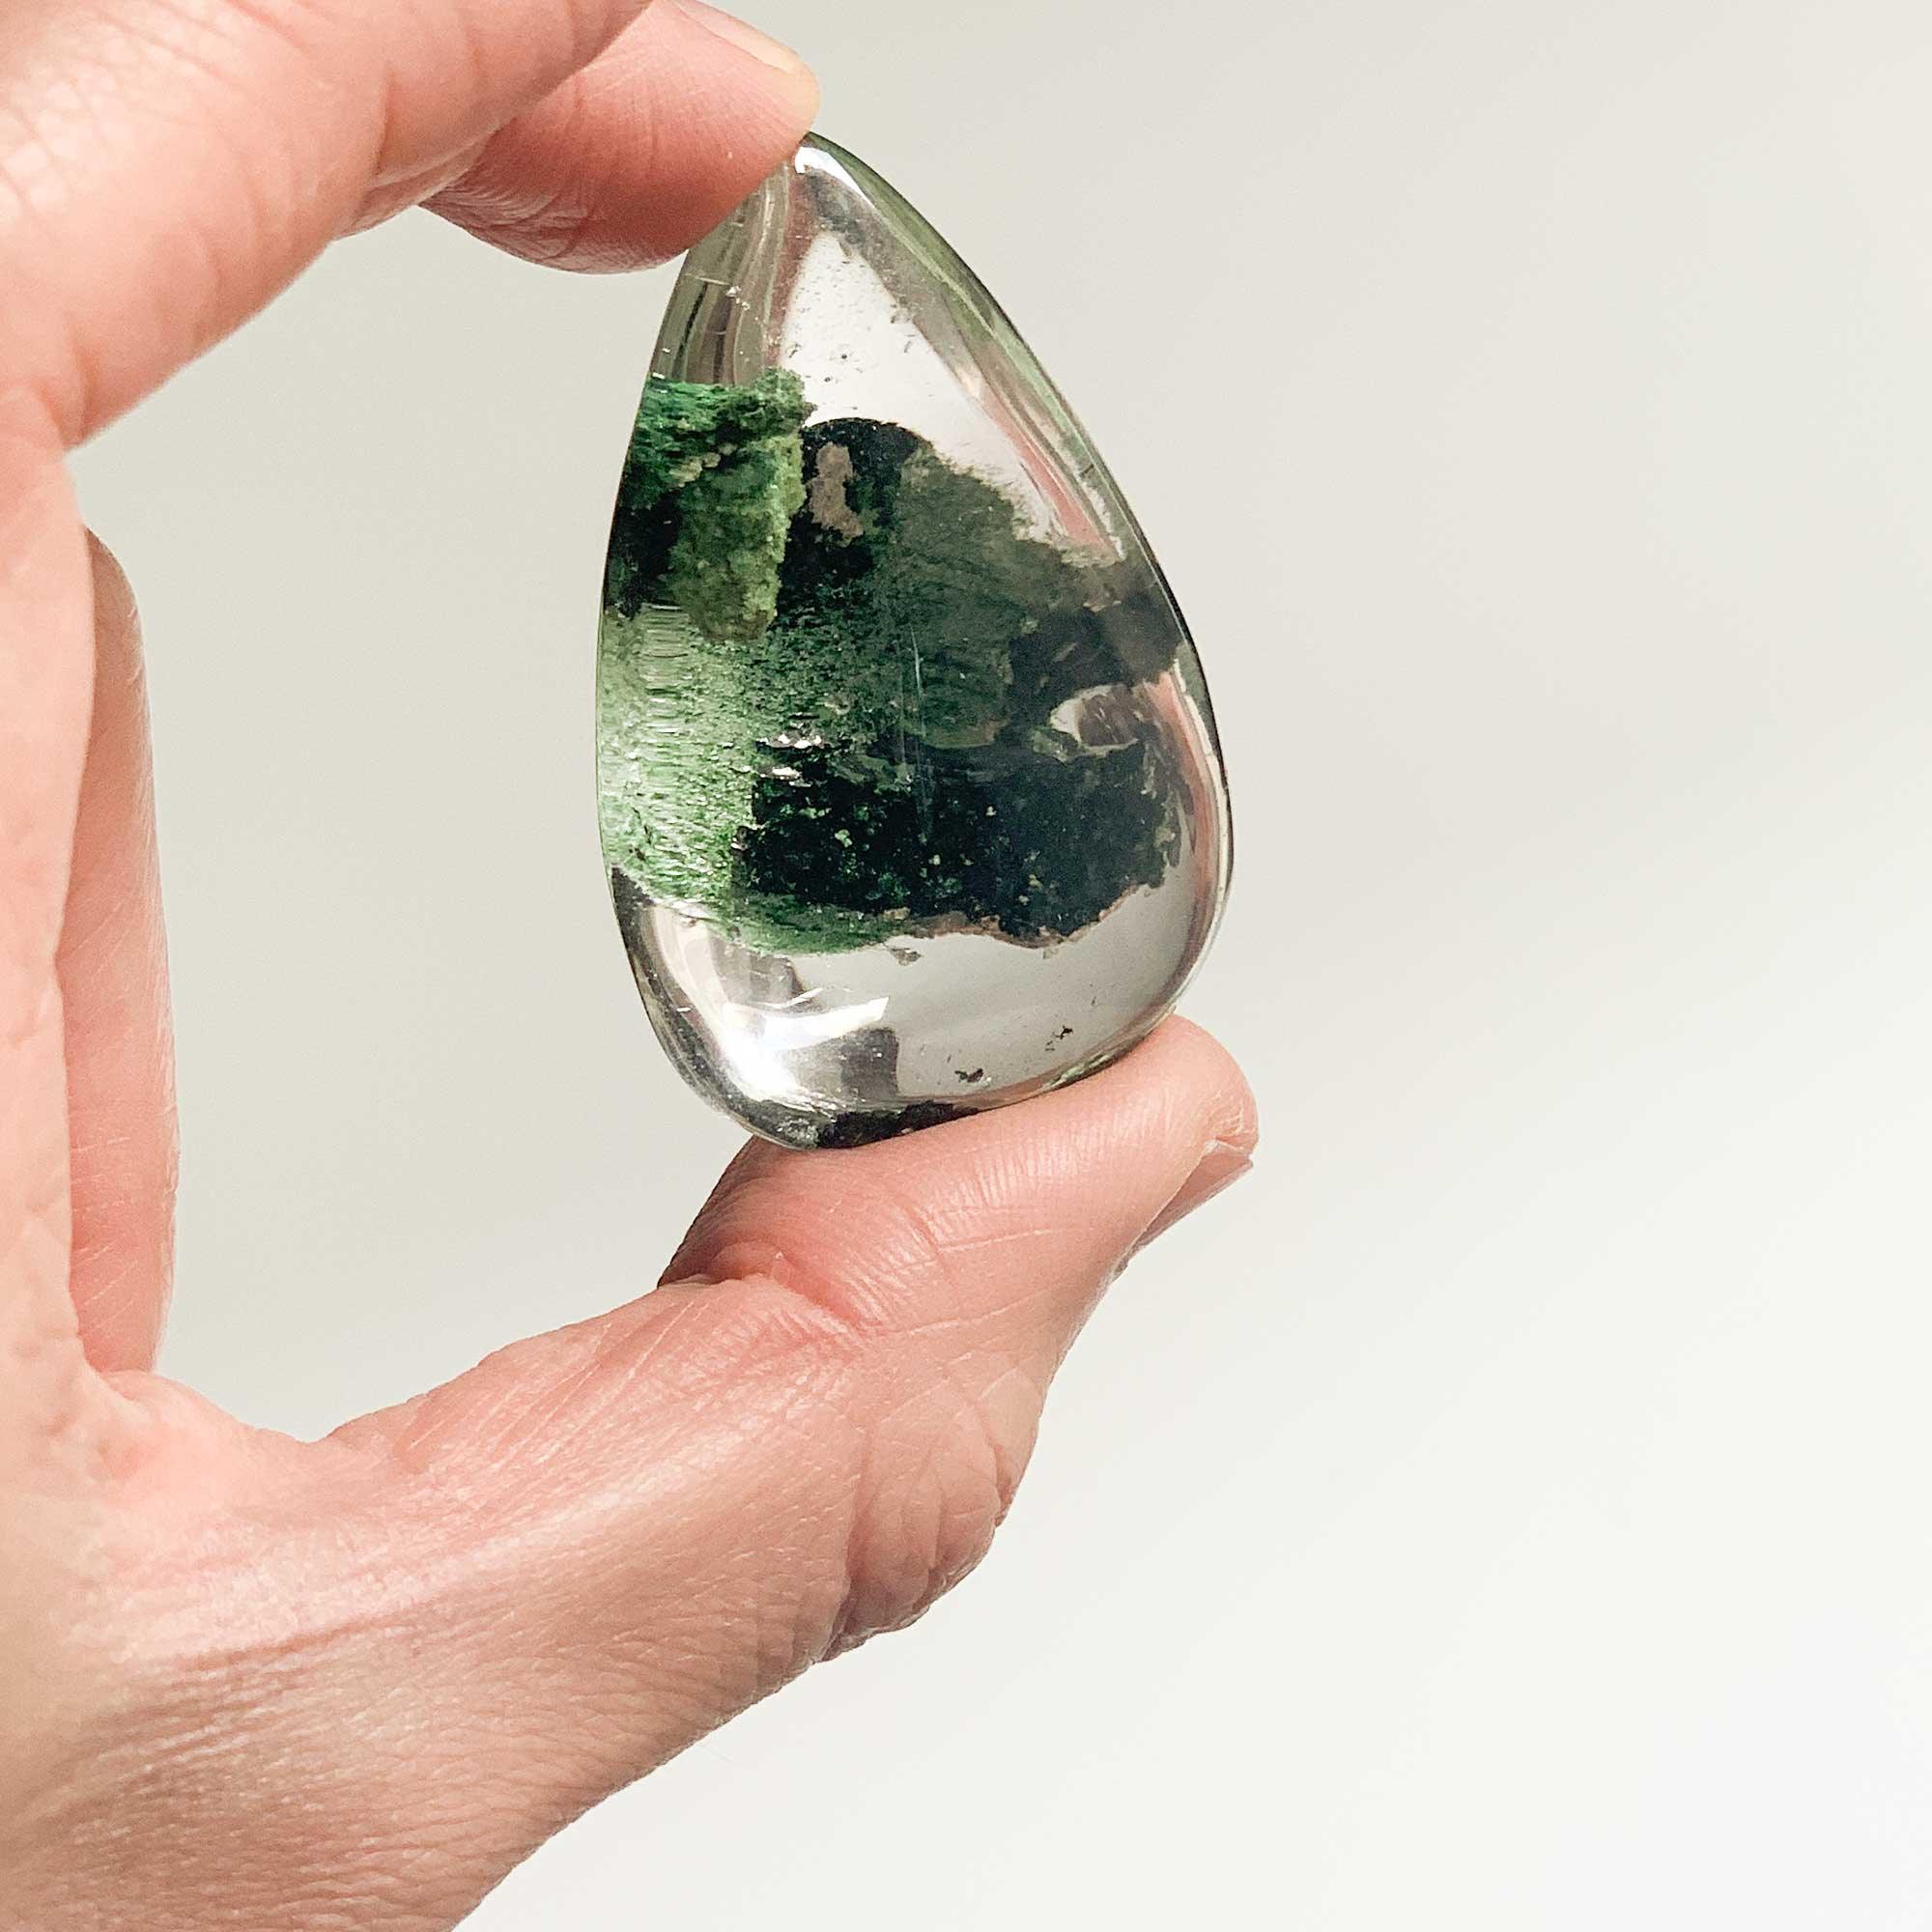 holding large green ghost crystal